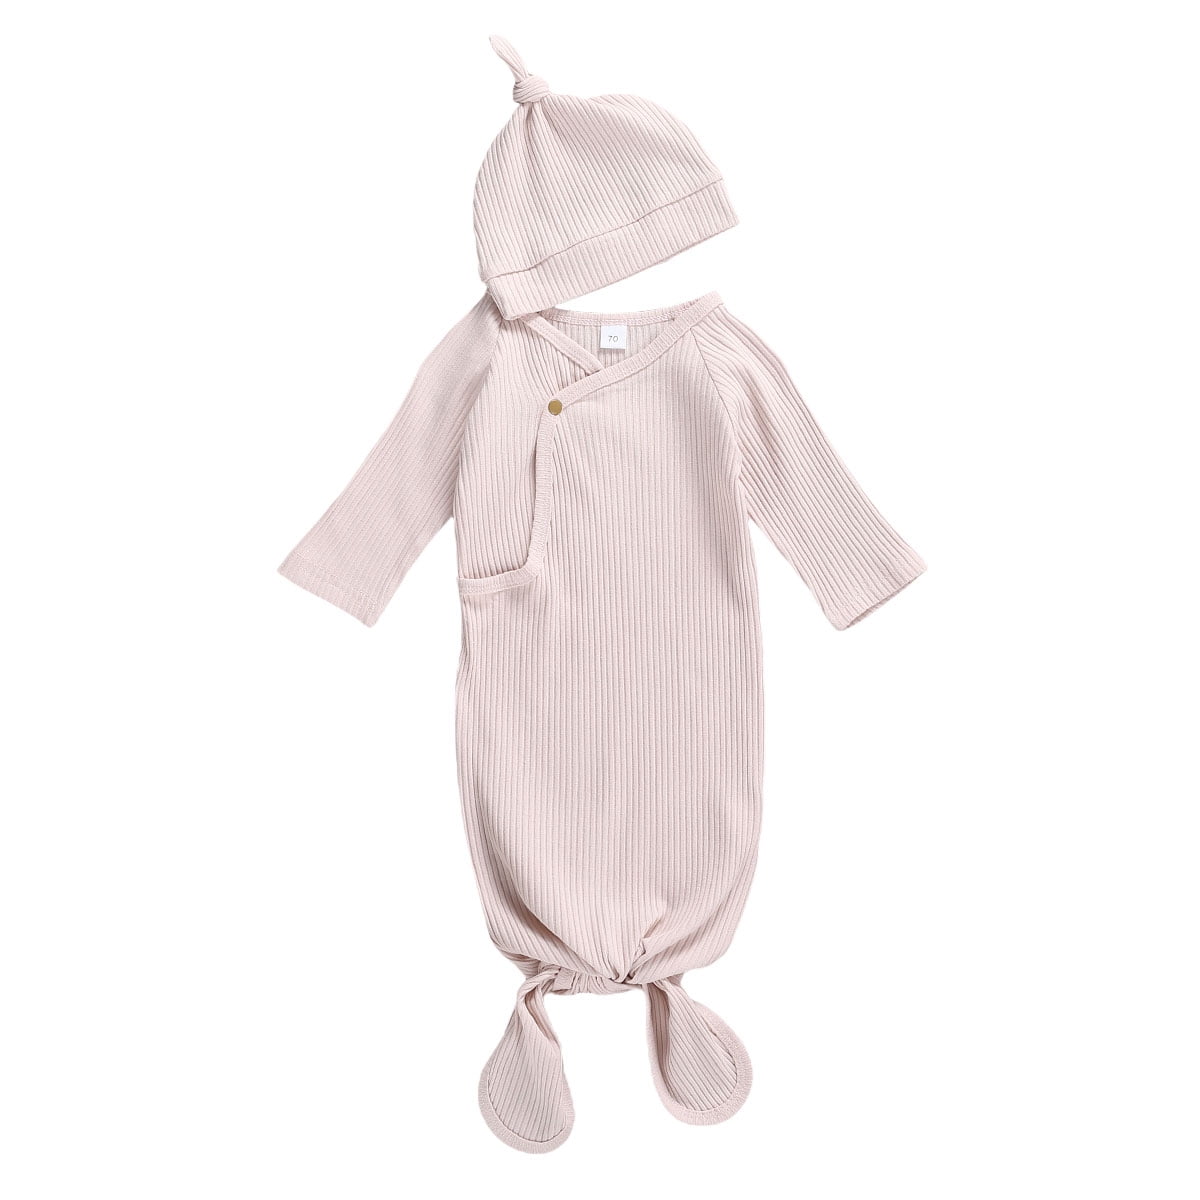 Newborn Baby Girl Boy Knotted Gown Set Infant Sleeper Nightgown with Hat Outfit Clothes aa5c1ed4 fed9 4a8d b779 88dca09d60c6.784c38b467f06b8a61a74586bac7f4ef